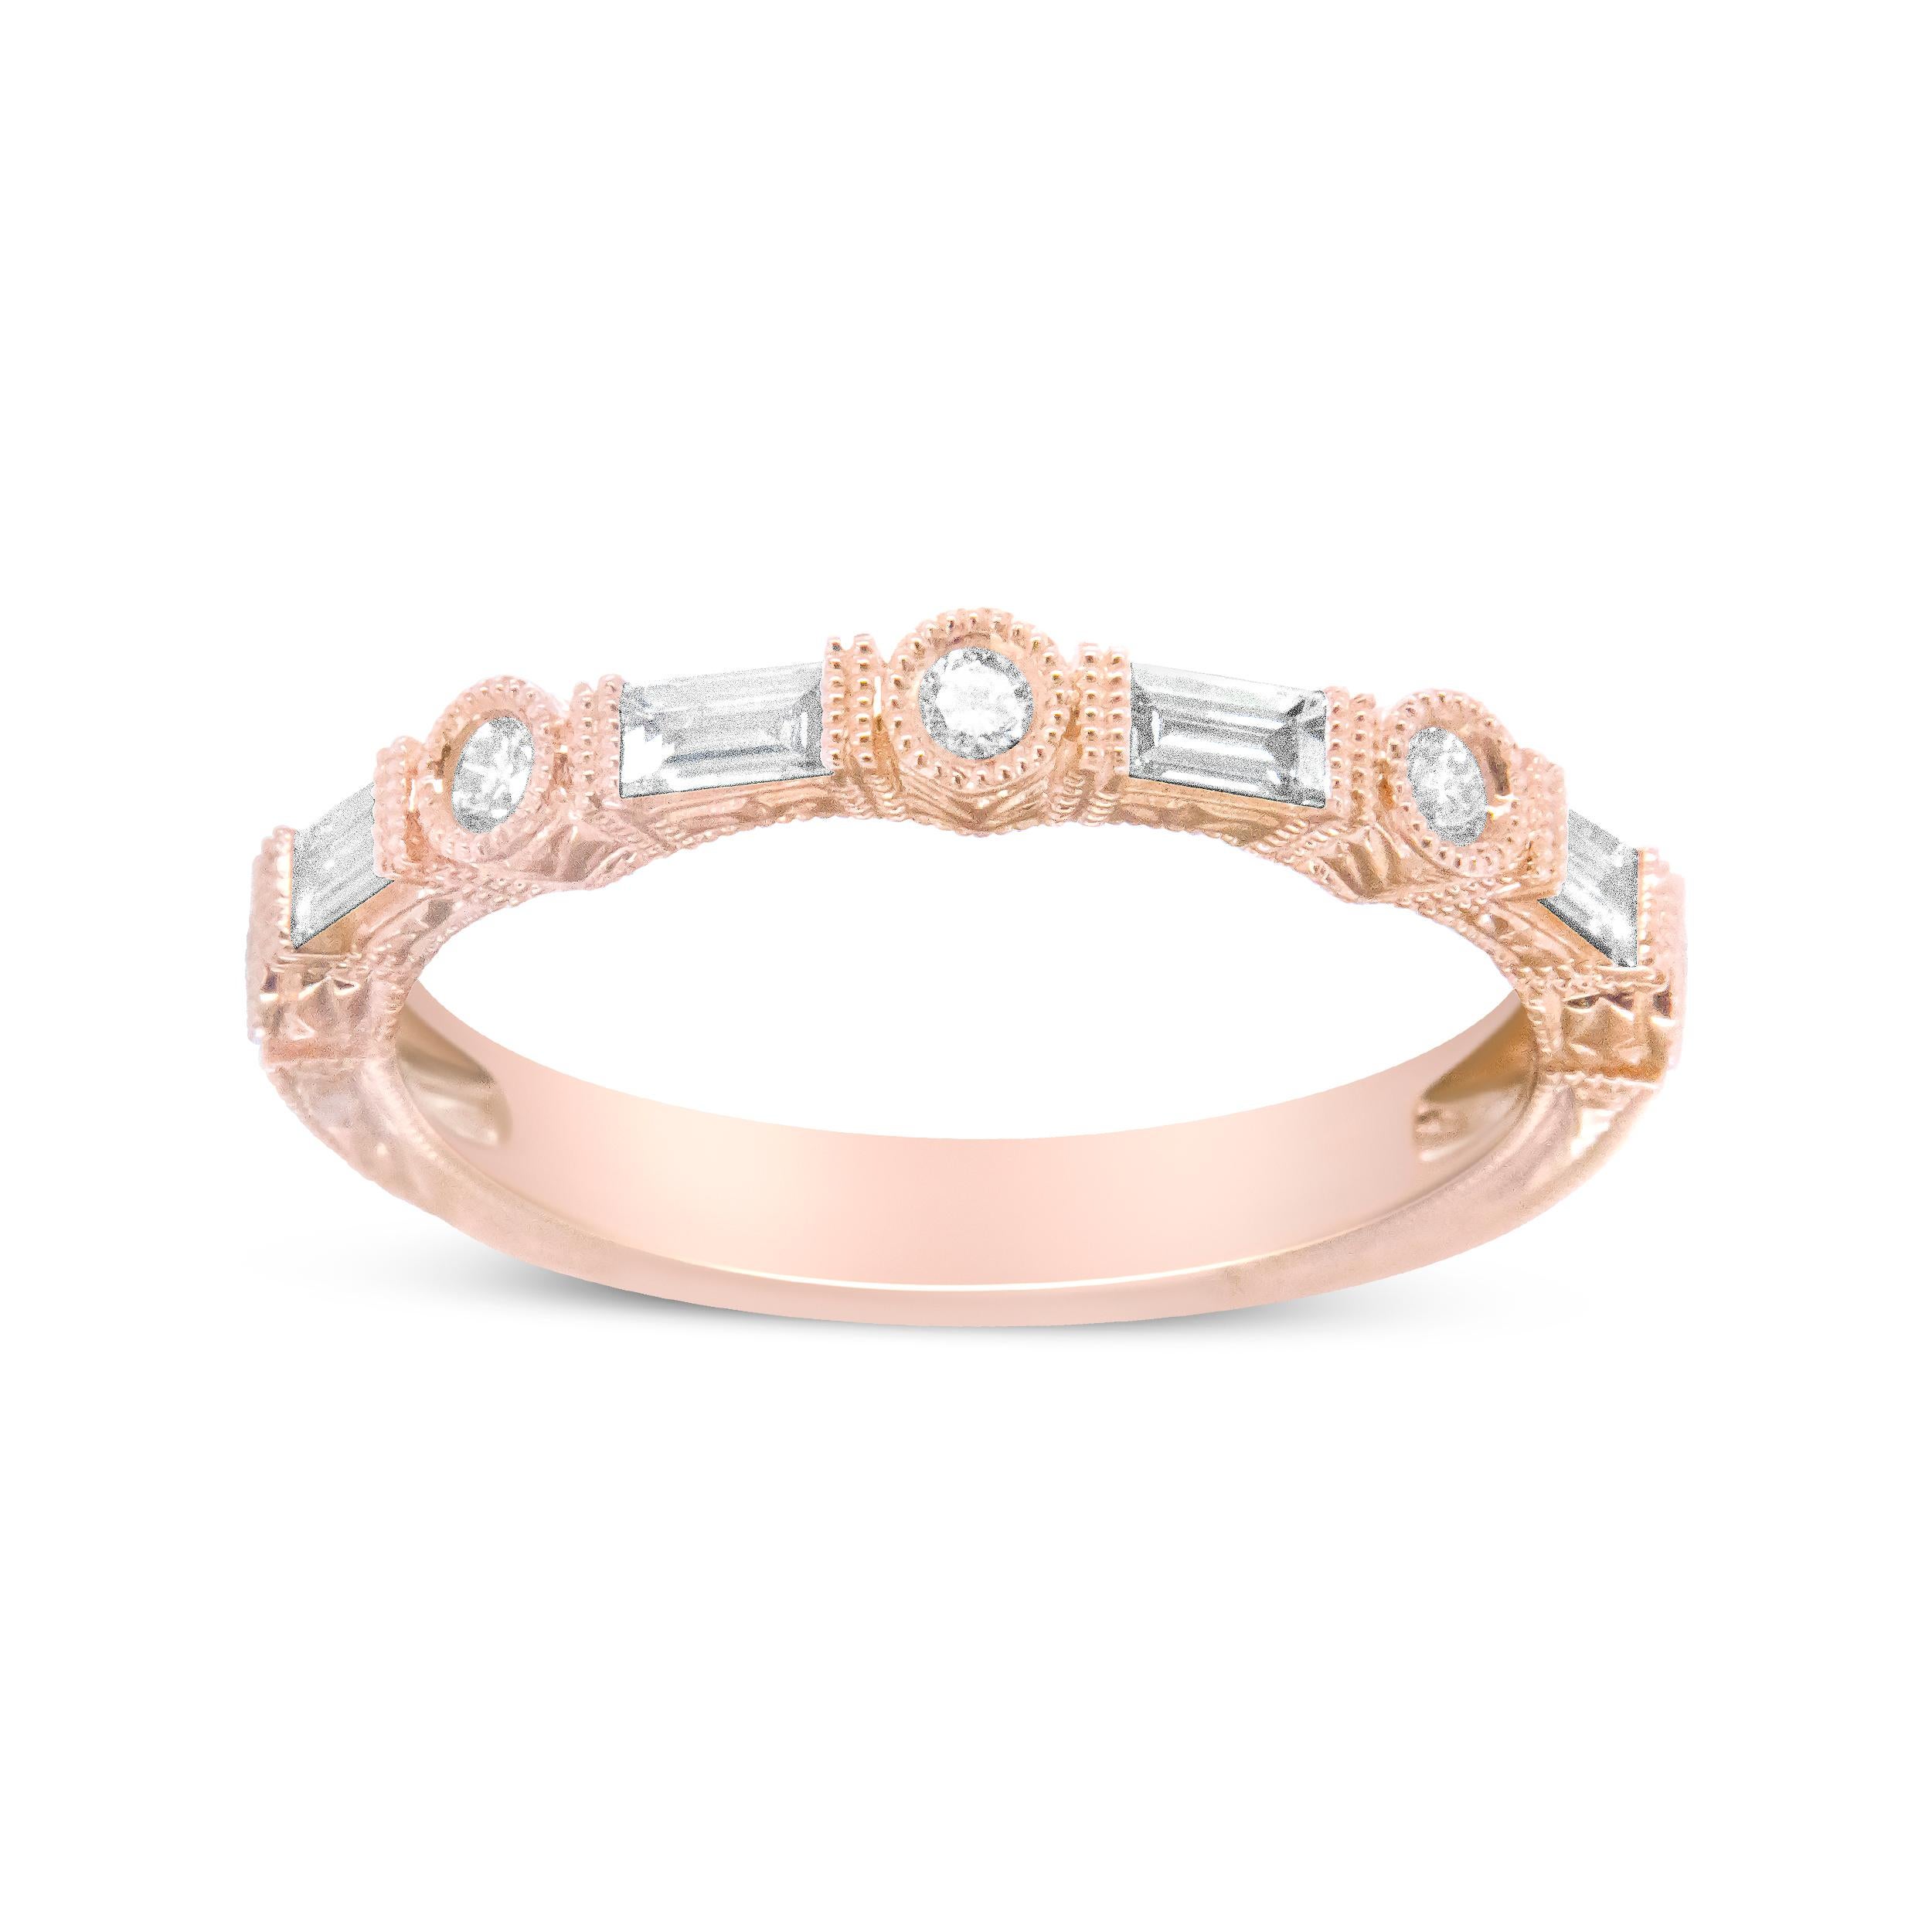 An enchanting design inspired by romance, this fascinating bridal ring captures a fairy-tale charm in 14k rose gold, set with a total 3/8 cttw diamonds of an approximate H-I color and VS1-VS2 clarity. This captivating design is centered around an